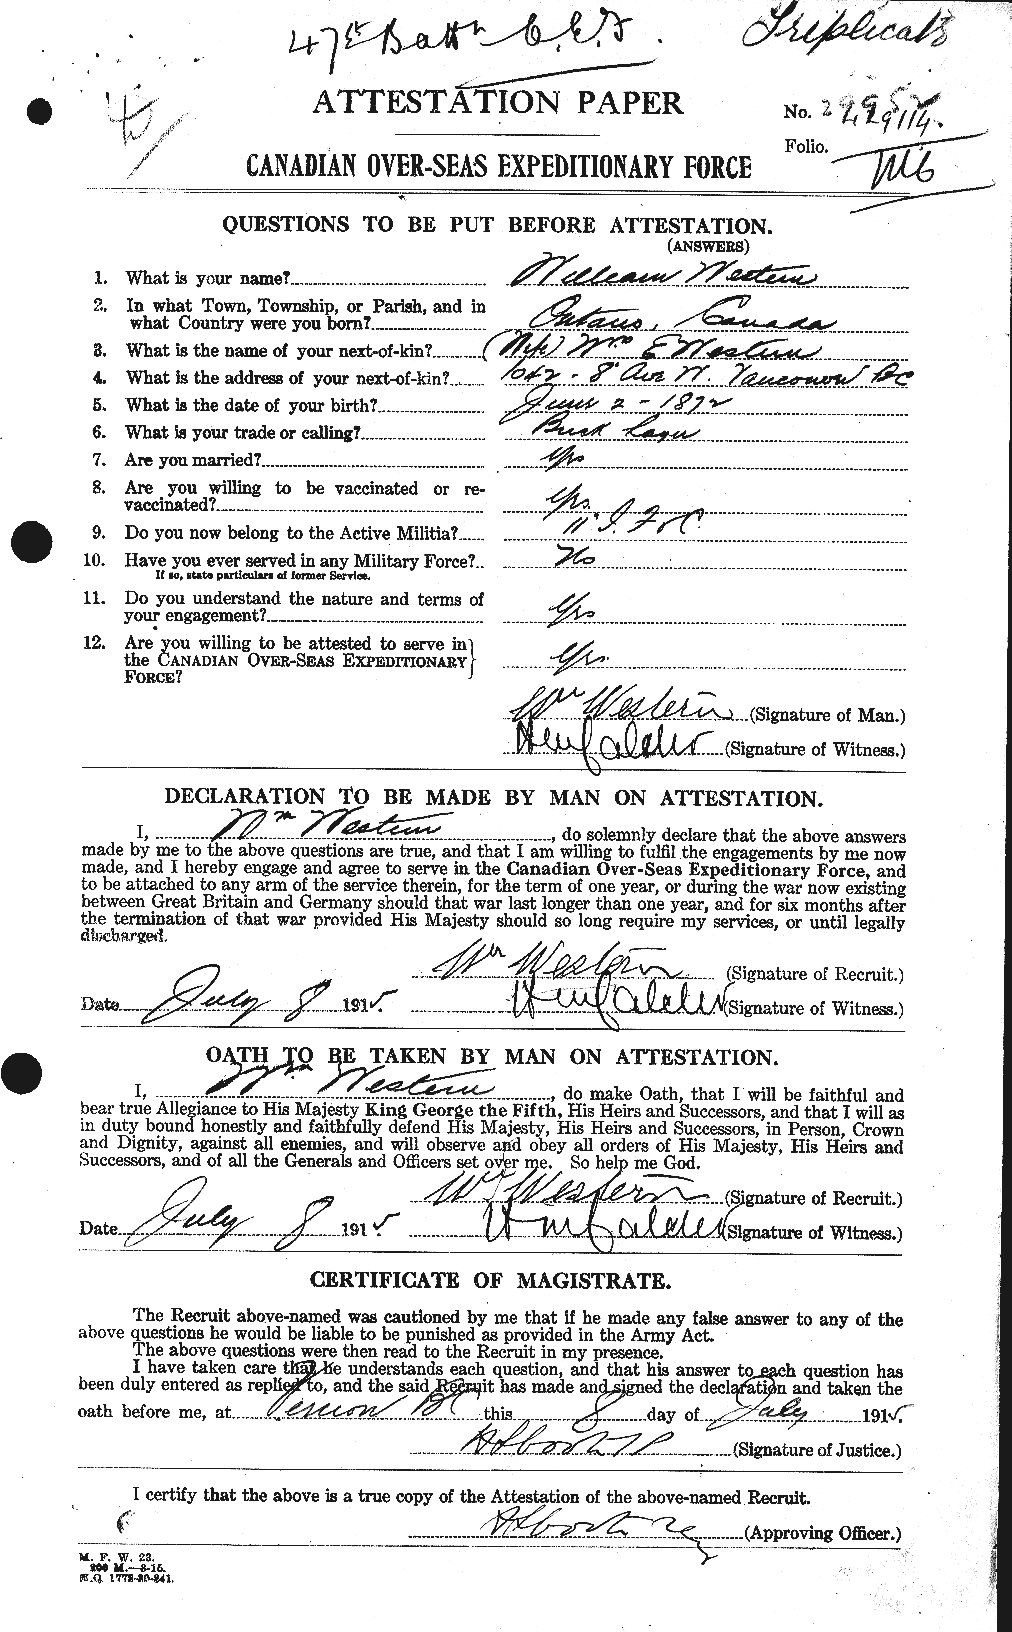 Personnel Records of the First World War - CEF 668181a